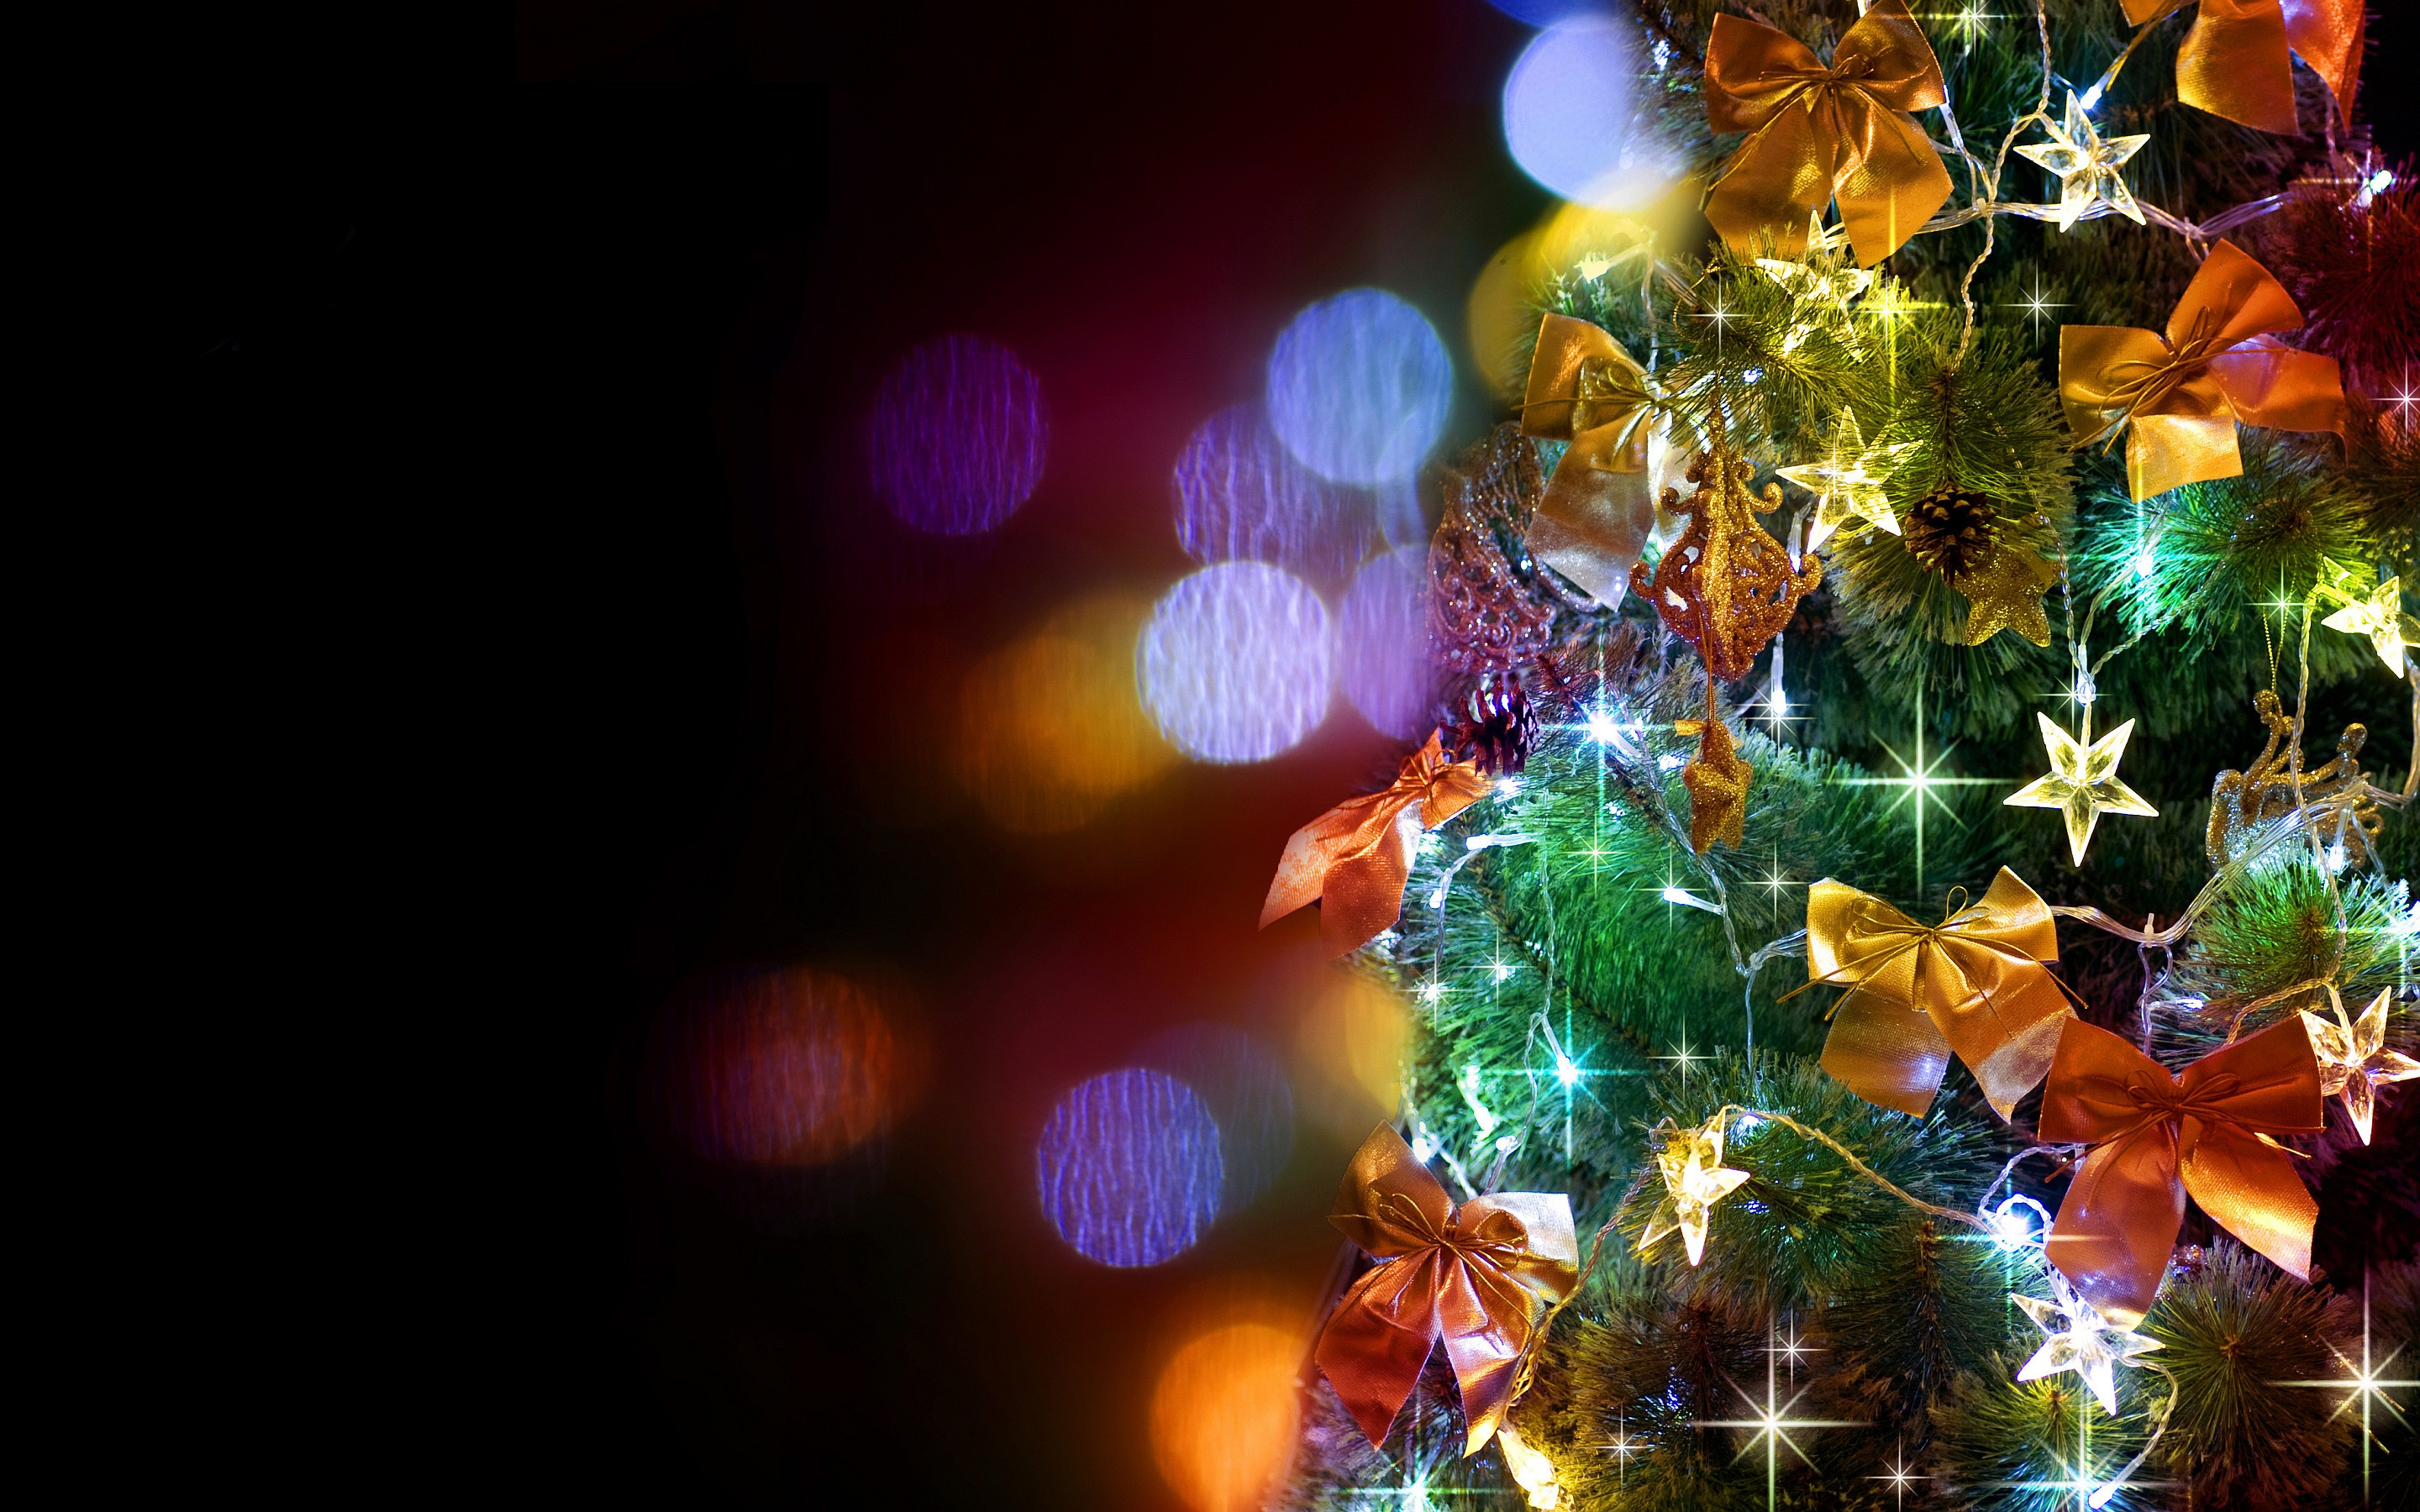 2880x1800 Free download 25 Super HD Christmas Wallpapers [] for your Desktop, Mobile \u0026 Tablet | Explore 76+ Xmas Tree Wallpaper | Xmas Wallpapers and Screensavers, Windows 7 Xmas Wallpaper, Free Xmas Wallpaper Desktop Themes